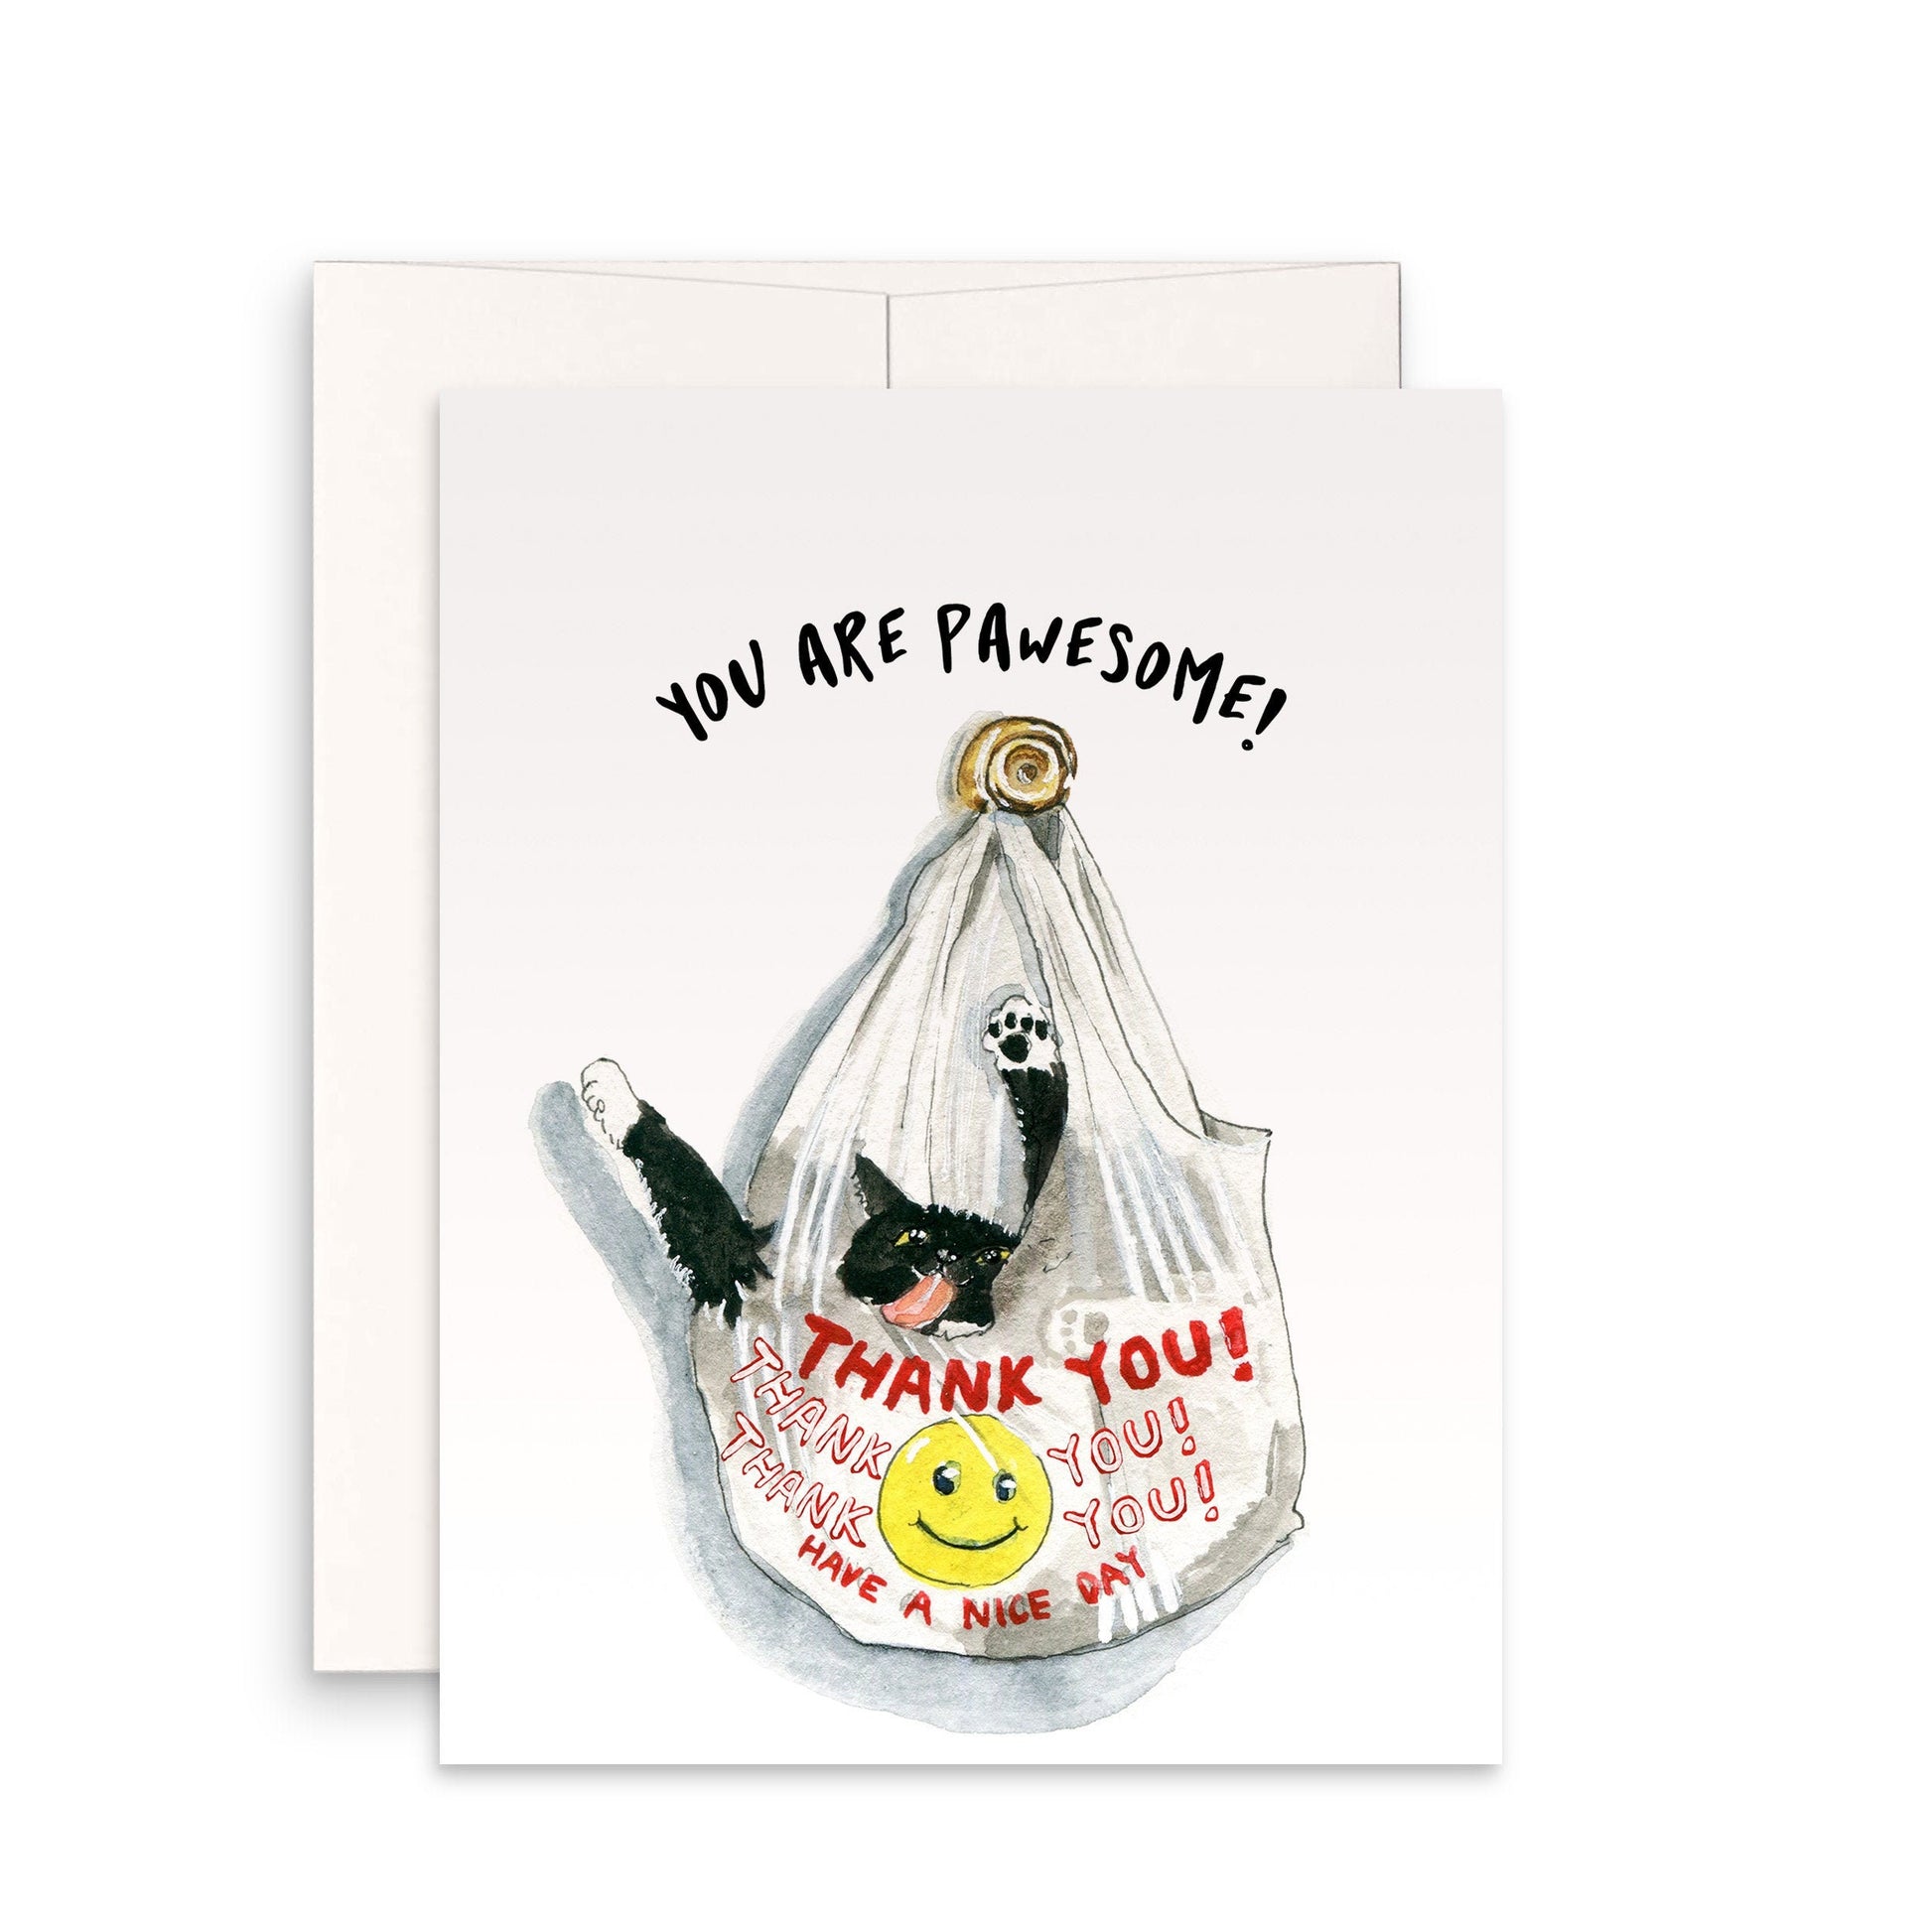 Black Cat Shopping Bag Funny Thank You Cards Set - Tuxedo Cats Thank You Notes Greeting Card Pack